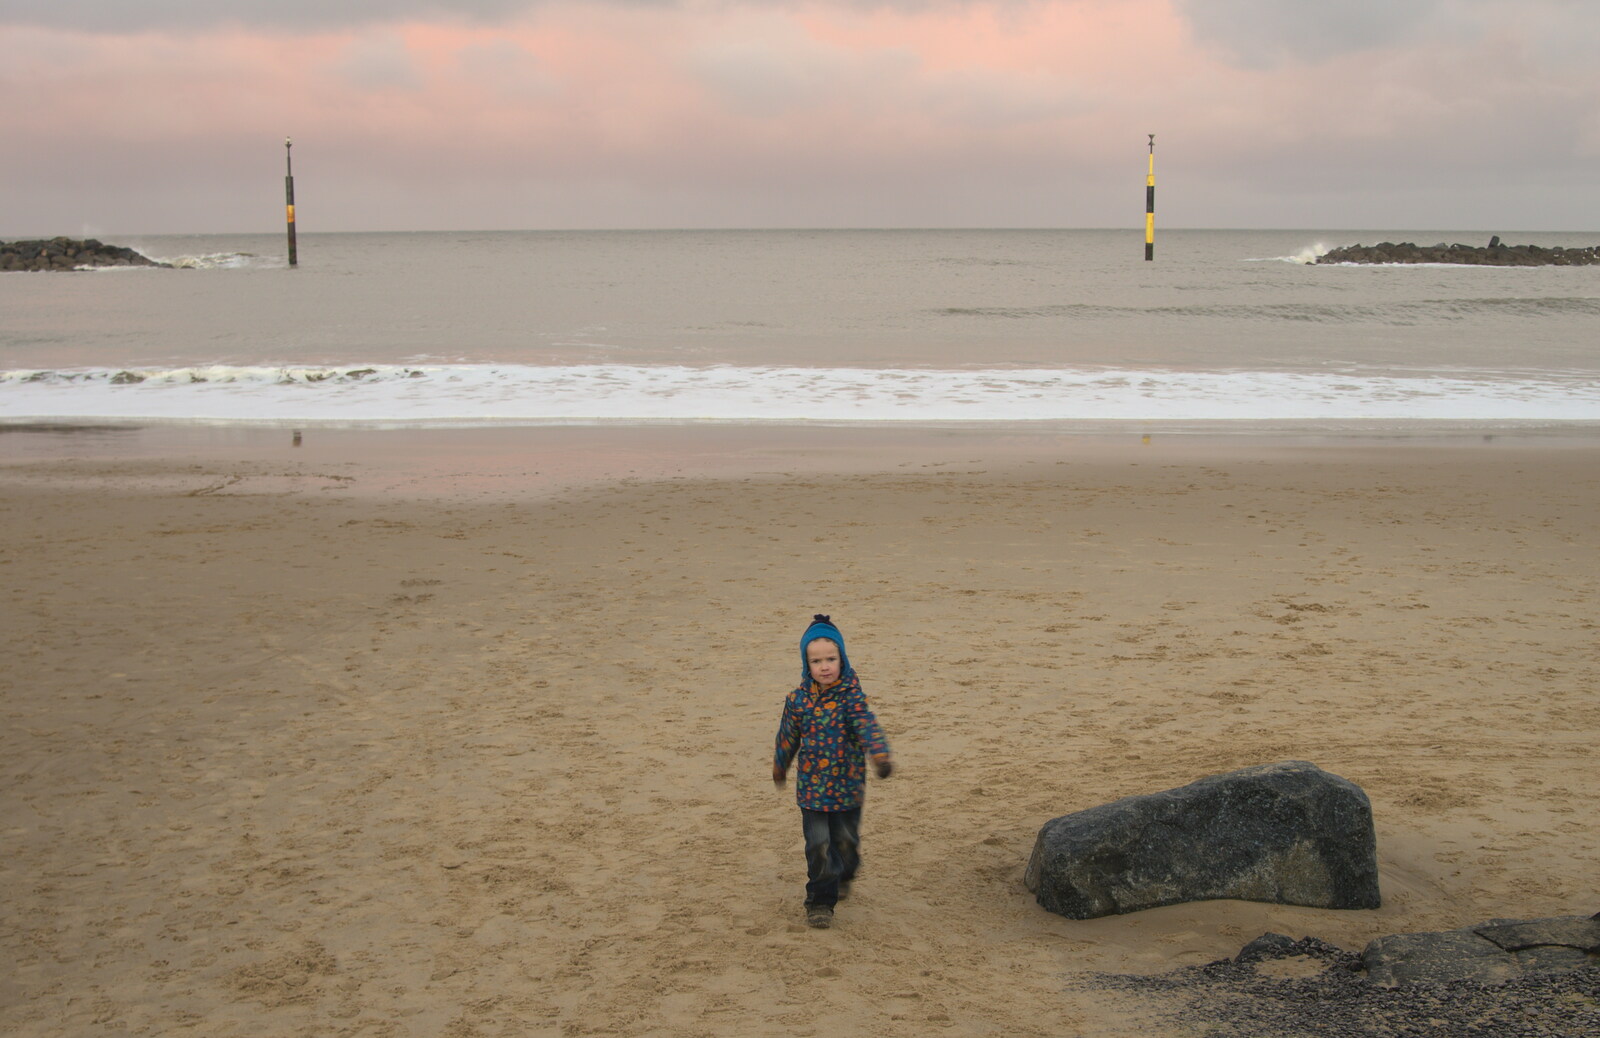 Harry on the beach from Horsey Seals and Sea Palling, Norfolk Coast - 2nd January 2017